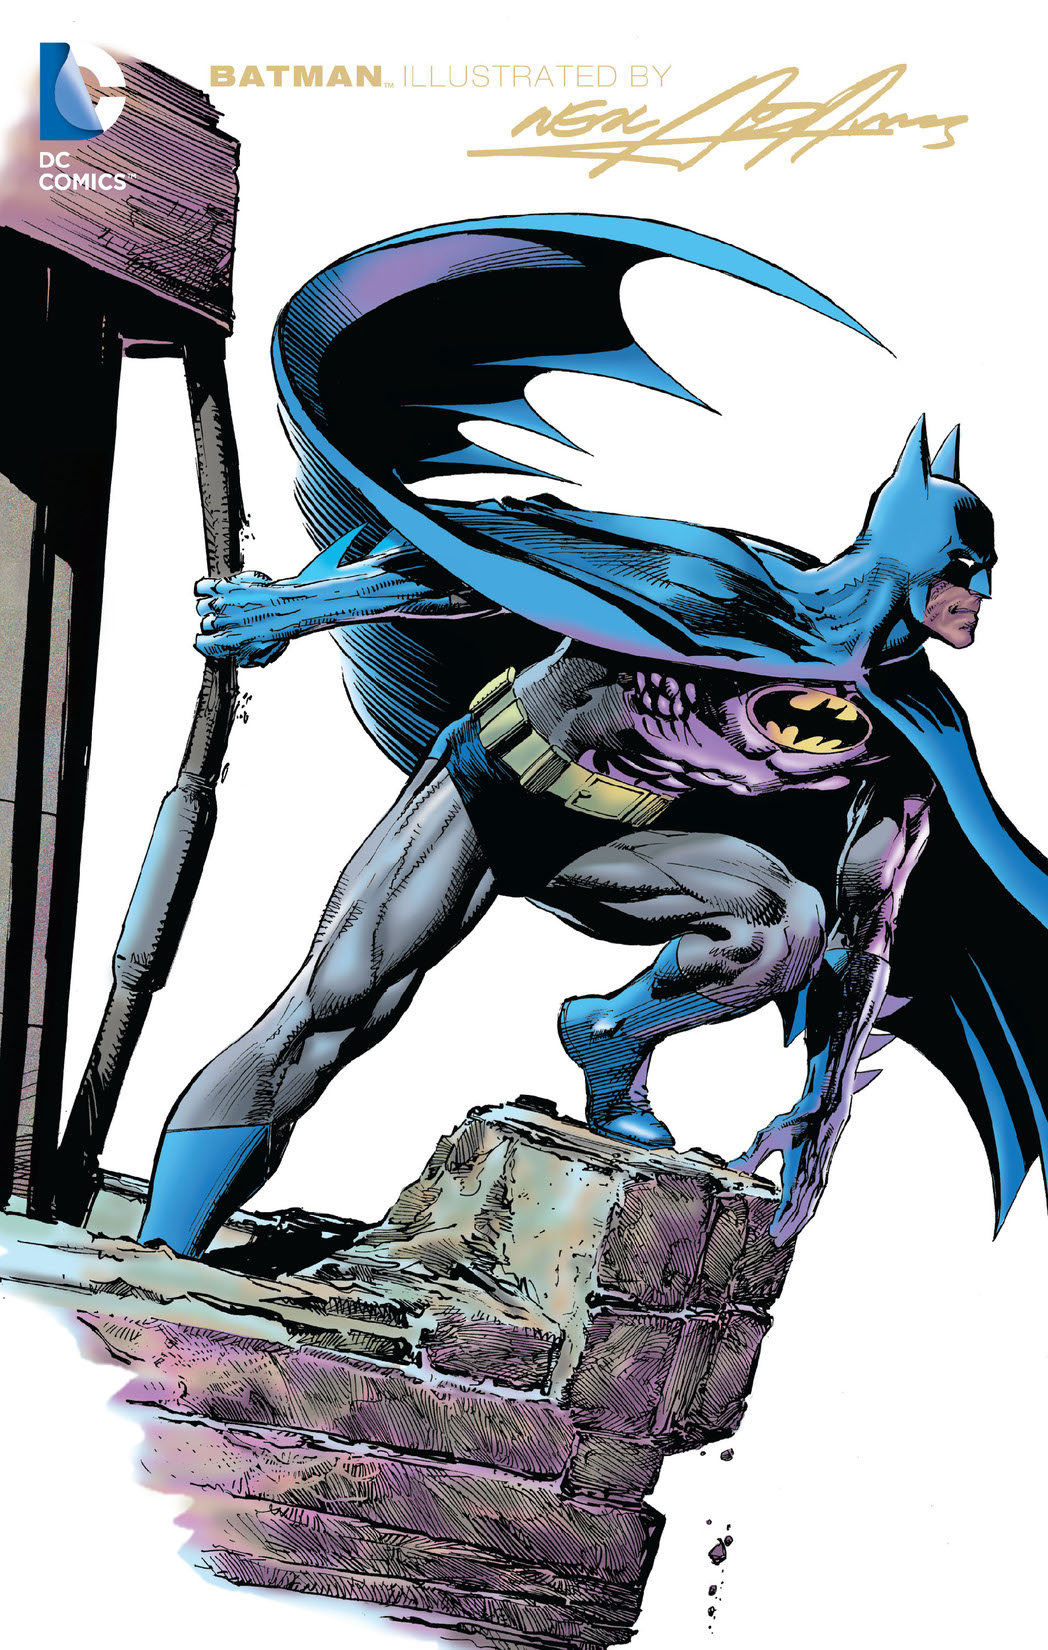 Batman: Illustrated by Neal Adams Vol. 3 preview images